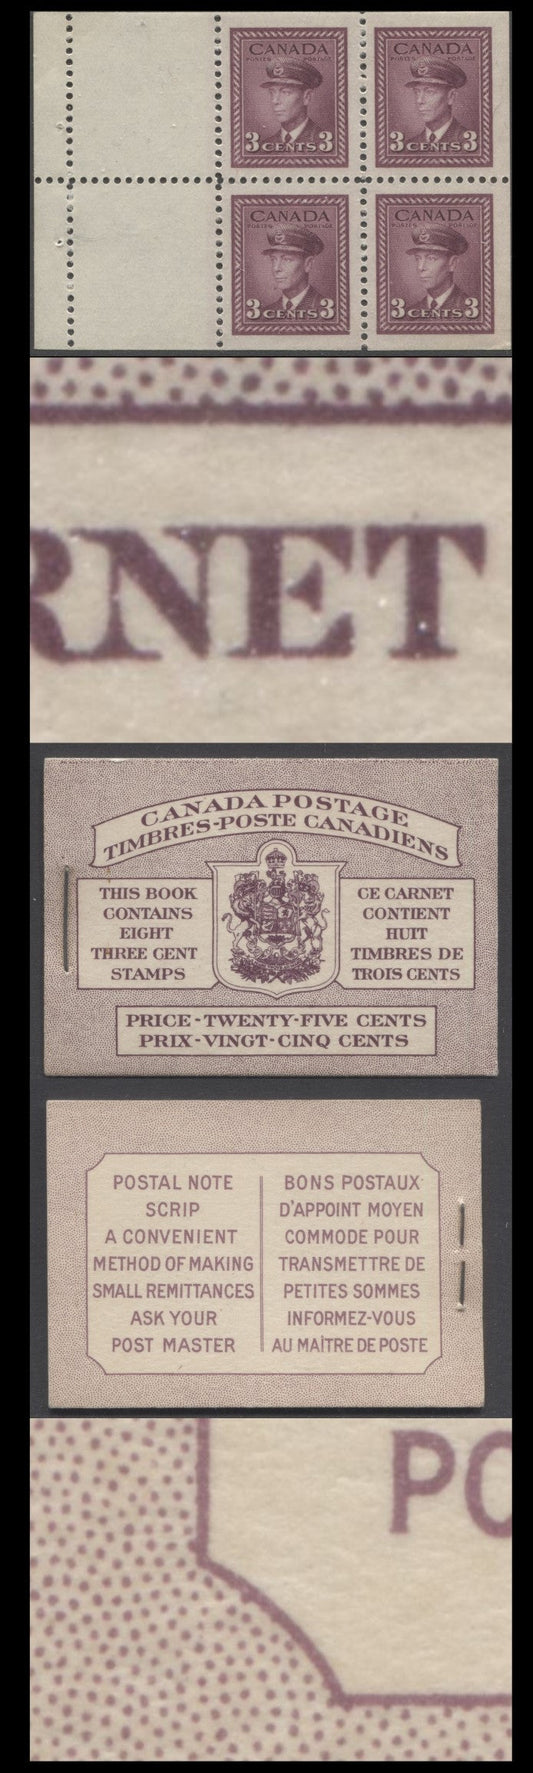 Lot 87 Canada #BK35cB 1942-1947 War Issue, A Complete 25c Bilingual Booklet, 2 Panes Of 4+2 Labels 3c Rose Violet, Front Cover IIId, Back Cover Fbii, Type IIa, Dark Printing, 7c & 6c Rates, 'Post Master' Two Words, 407,000 Issued